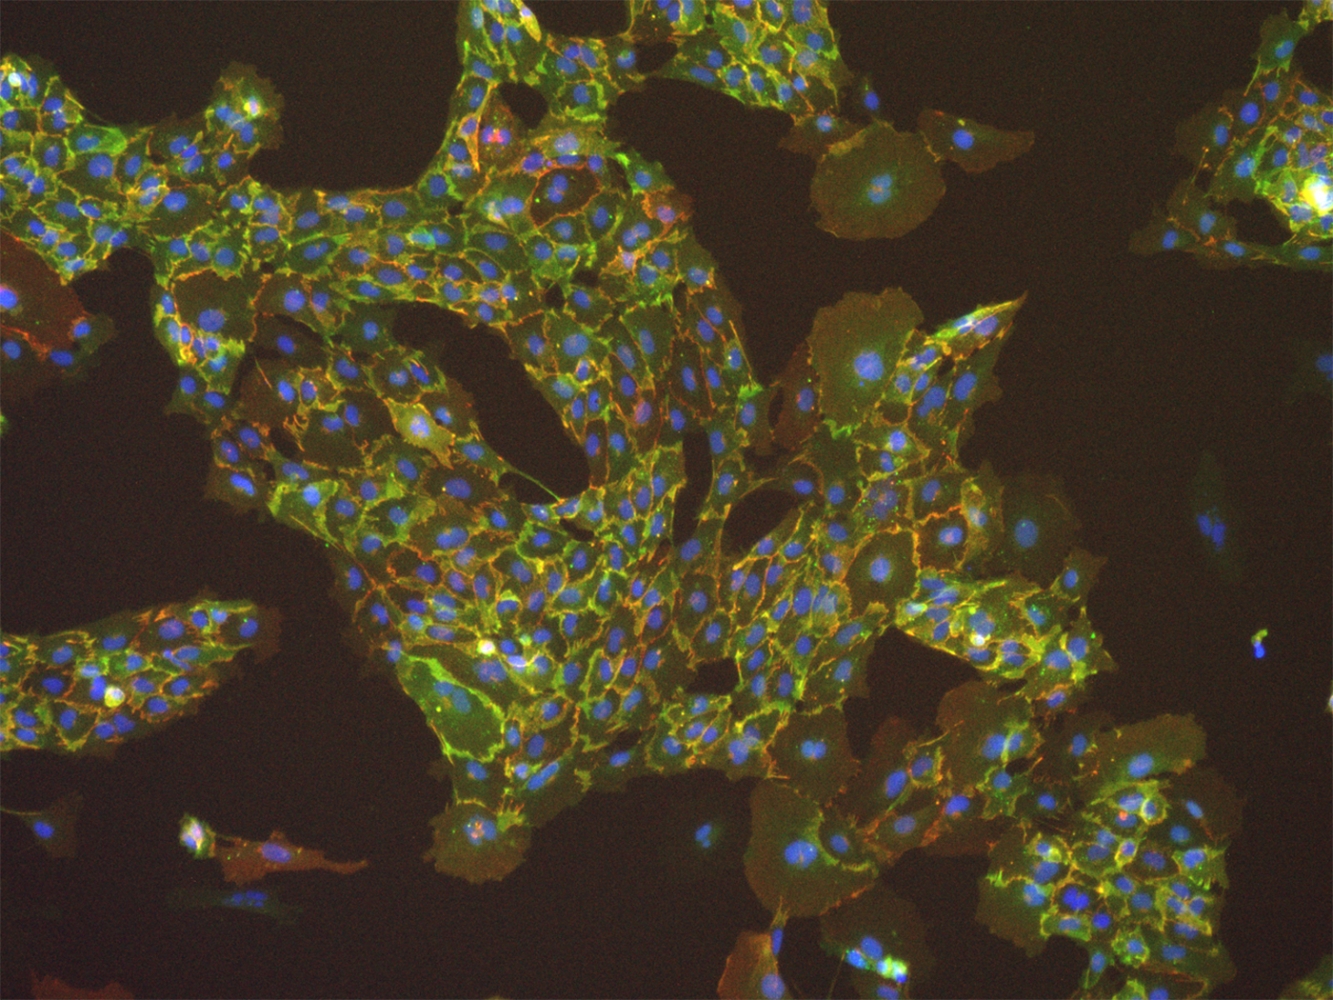 The image shows human endothelial cells derived from human induced pluripotent stem cells